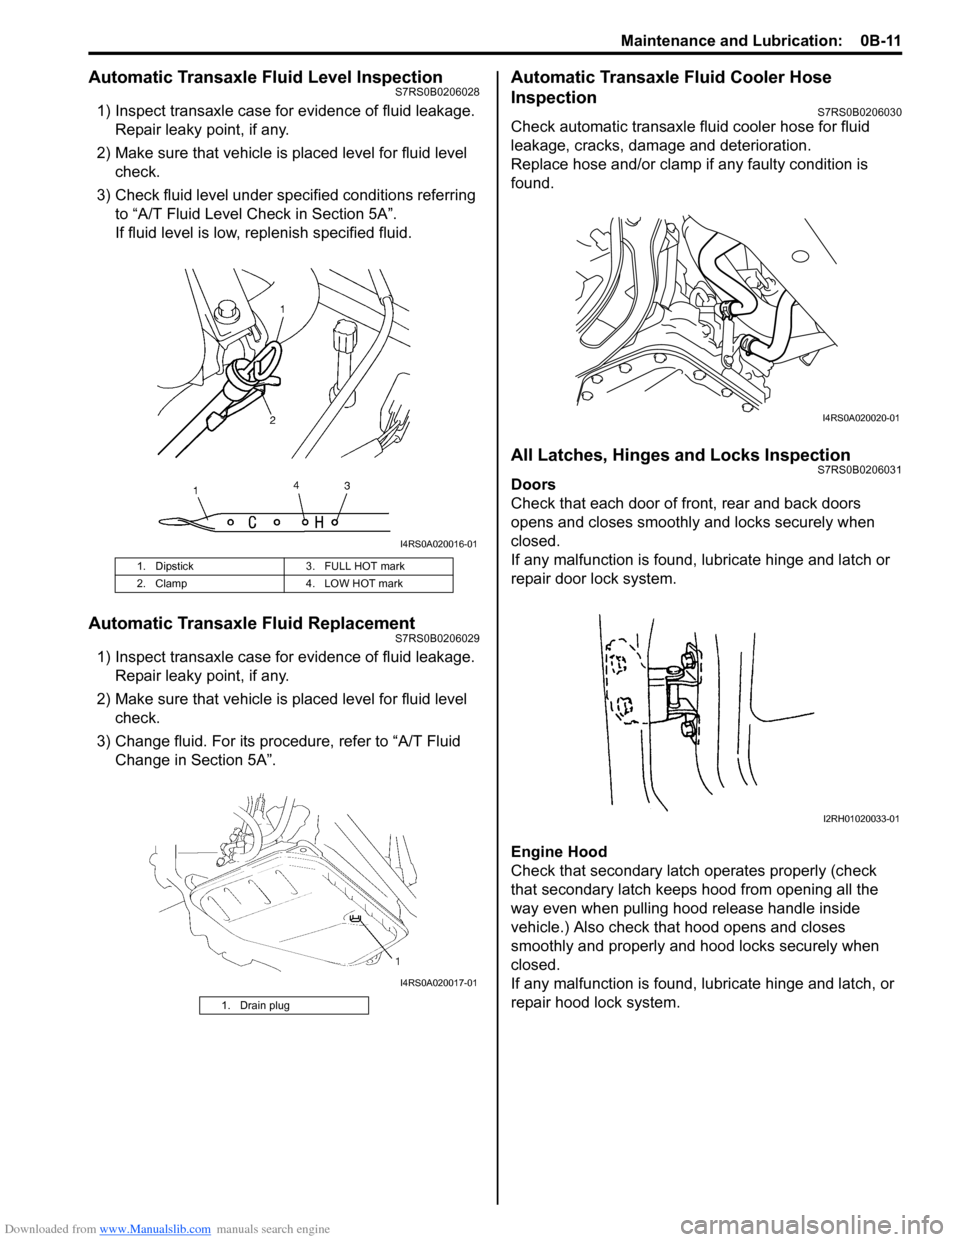 SUZUKI SWIFT 2008 2.G Service Workshop Manual Downloaded from www.Manualslib.com manuals search engine Maintenance and Lubrication:  0B-11
Automatic Transaxle Fluid Level InspectionS7RS0B0206028
1) Inspect transaxle case for evidence of fluid lea